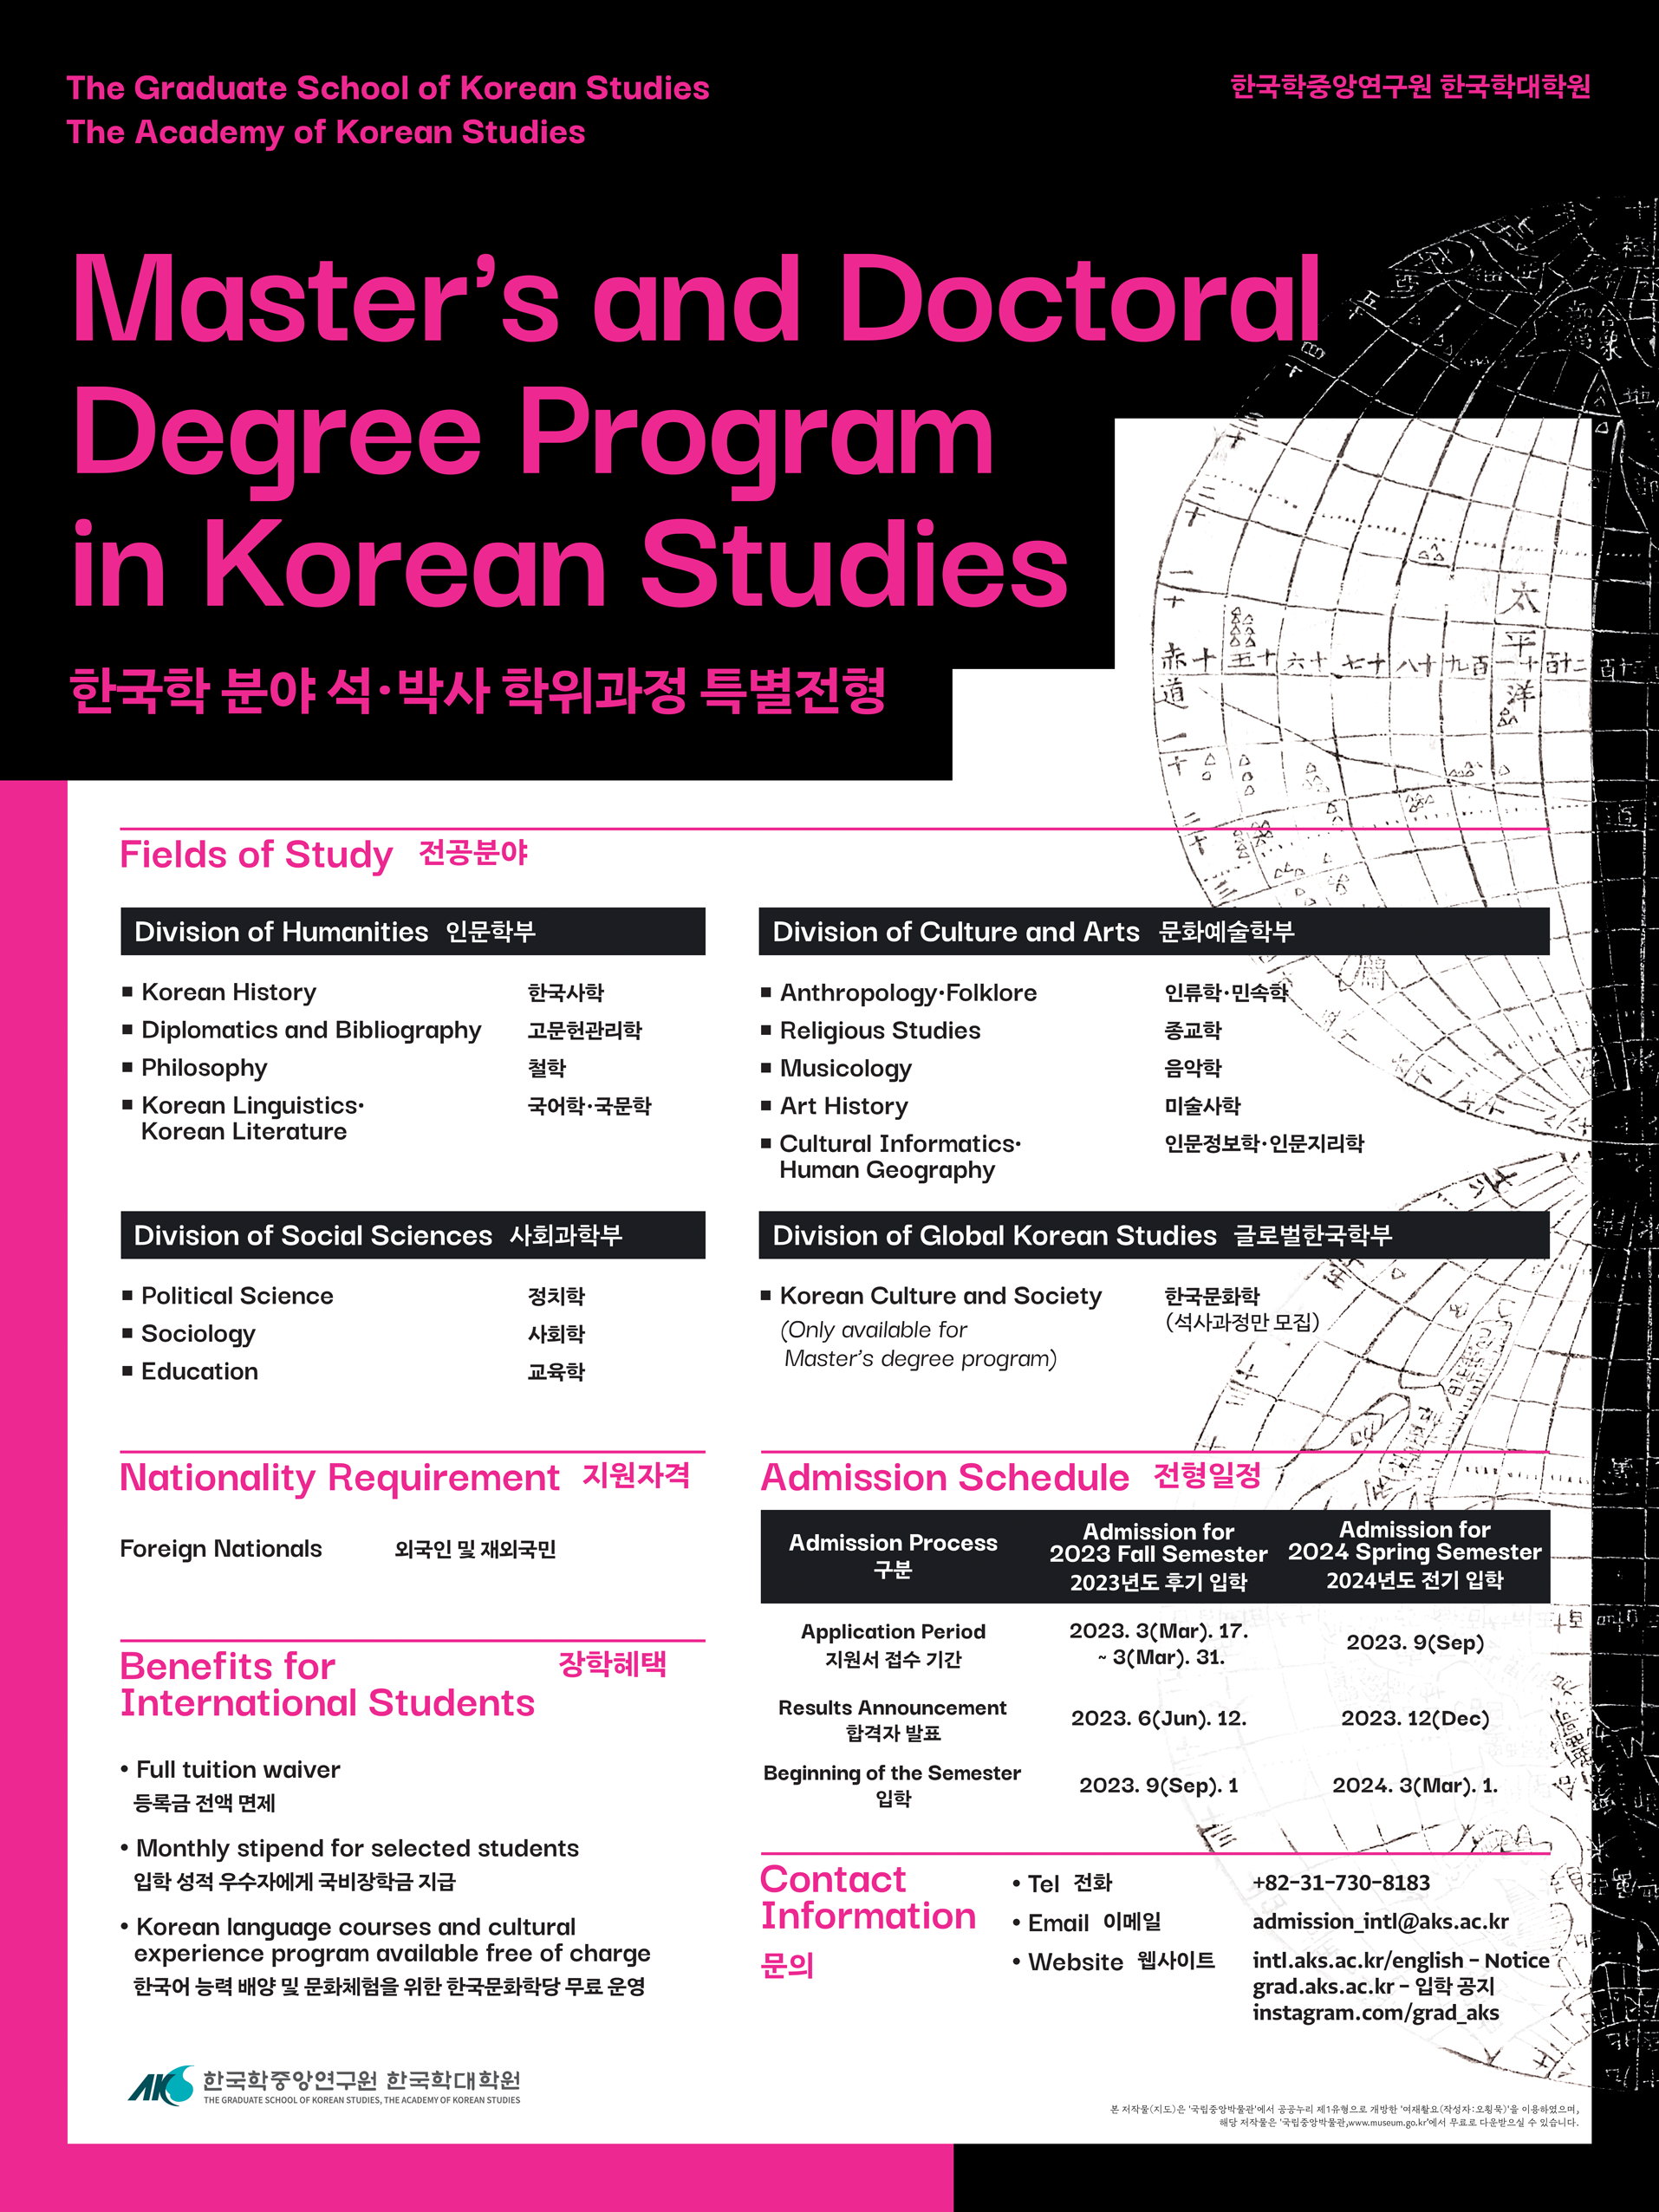 The Graduate School of Korean Studies The Academy of Korean Studies 한국학중앙연구원 한국학대학원Master's and Doc Degree Program in Korean Studies 한국학 분야 석• 박사 학위과정 특별전형Fields of Study 전공분야pivision of Humanities 인문학부• Korean History • Diplomatics and Bibliography • Philosophy • Korean Linguistics Korean Literature한국사학 고문헌관리학 철학 국어학•국문학Division of Social sciences 사회과학부• Political Science • Sociology • Education정치학 사회학 교육학Division of Culture and Arts 문화예술학부• Anthropology•Folklore • Religious Studies • Musicology • Art History • Cultural Informatics• Human Geography인류학•민속학 종교학 음악학 미술사학 인문정보학 인문지리학 Division of Global Korean Studies 글로벌한국학부• Korean Culture and Society (Only available for Master's degree program)한국문화학 (석사과정만 모집)Nationality Requirement 지원자격Foreign Nationals 외국인 및 재외국민Benefits for International Student장학혜택• Full tuition waiver 등록금 전액 면제 • Monthly stipend for selected students 입학 성적 우수자에게 국비장학금 지급 • Korean language courses and cultural experience program available free of charge 한국어 능력 배양 및 문화체험을 위한 한국문화학당 무료 운영Admission Schedule 전형일정Admission Process 구분 Admission for 2023 Fall Semester 2024 Spring Semester 2023년도 후기 입학 2024년도 전기 입학 Application  Period 2023. 3(Mar). 17. 지원서 접수 기간 ~ 3(Mar). 31. 2023. 9(Sep) Results Announcement 합격자 발표 2023. 6(Jun). 12. 2023. 12(Dec) Beginning of the Semester 입학 2023. 9(Sep). 1Contact Information  문의• Tel 전화 • Email 이메일 • Website 웹사이트+82-31-730-8183 admission_intl@aks.ac.kr intl.aks.no.kr/english - Notice grad.aks.ac.kr- 입학 공지 instagram.com/grad_aks 